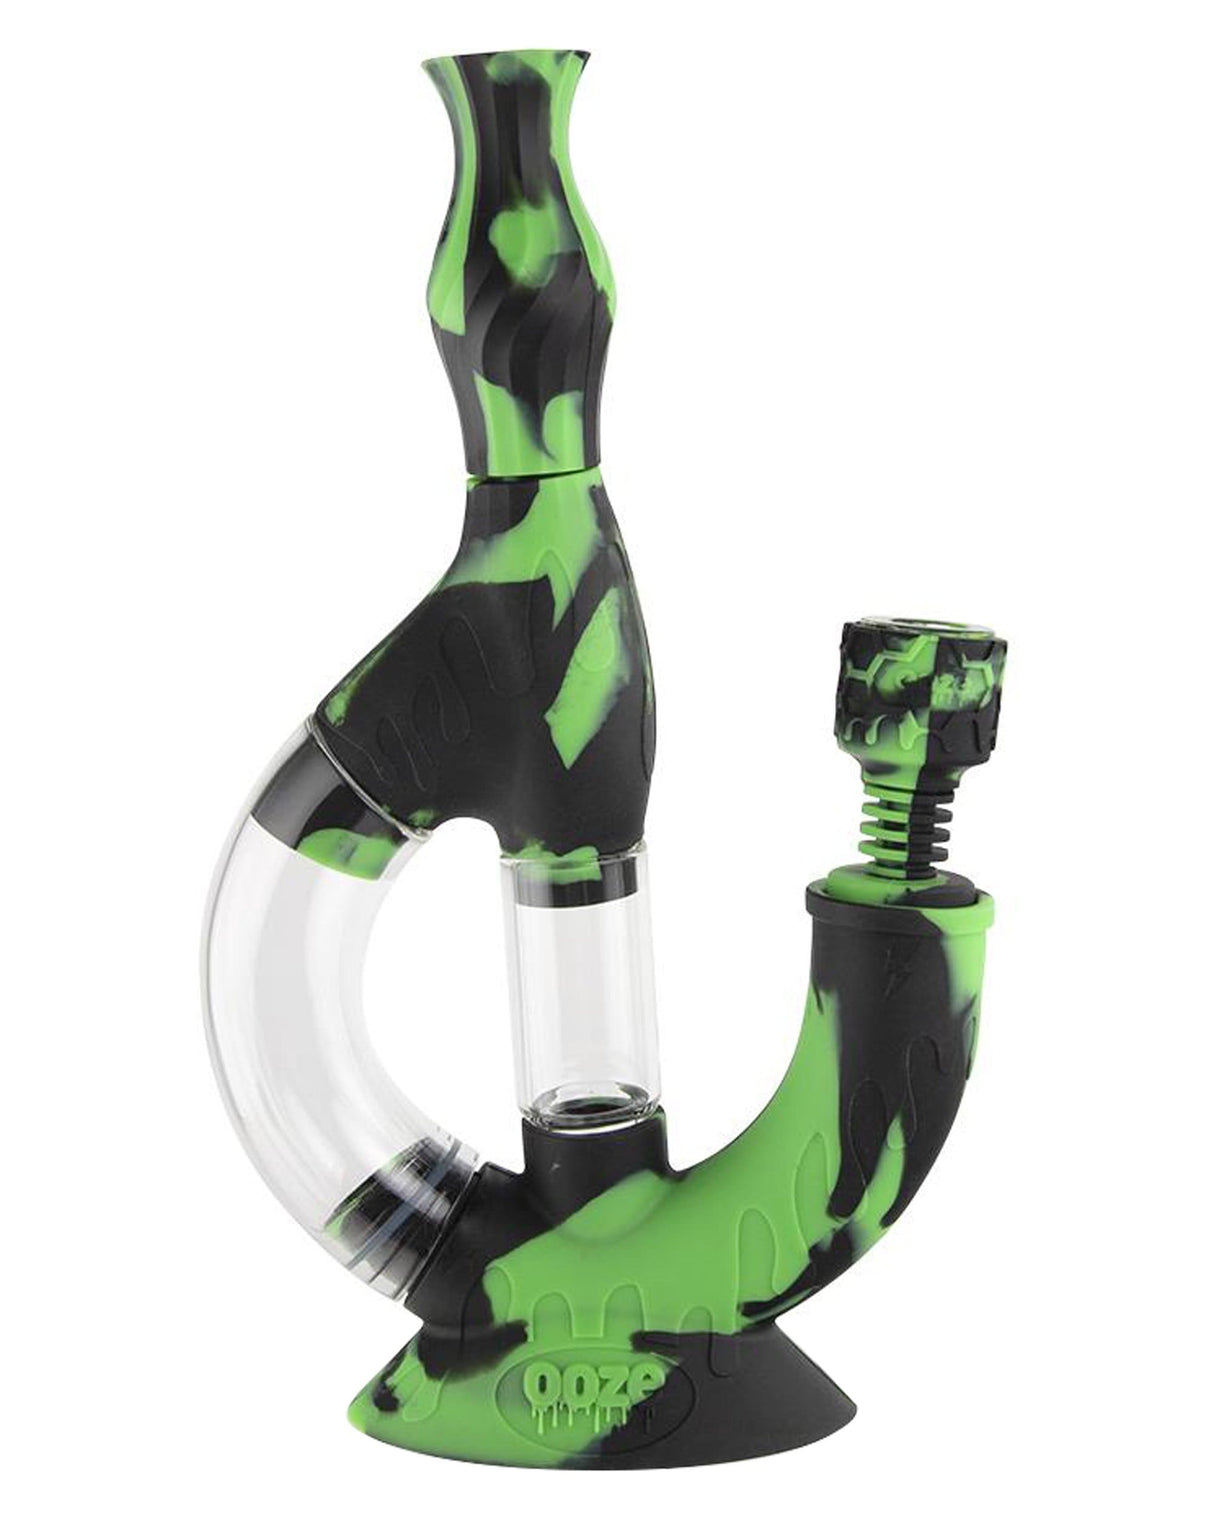 Ooze Echo 4-in-1 Silicone Bong in Black & Green, 9" with Slitted Percolator - Front View